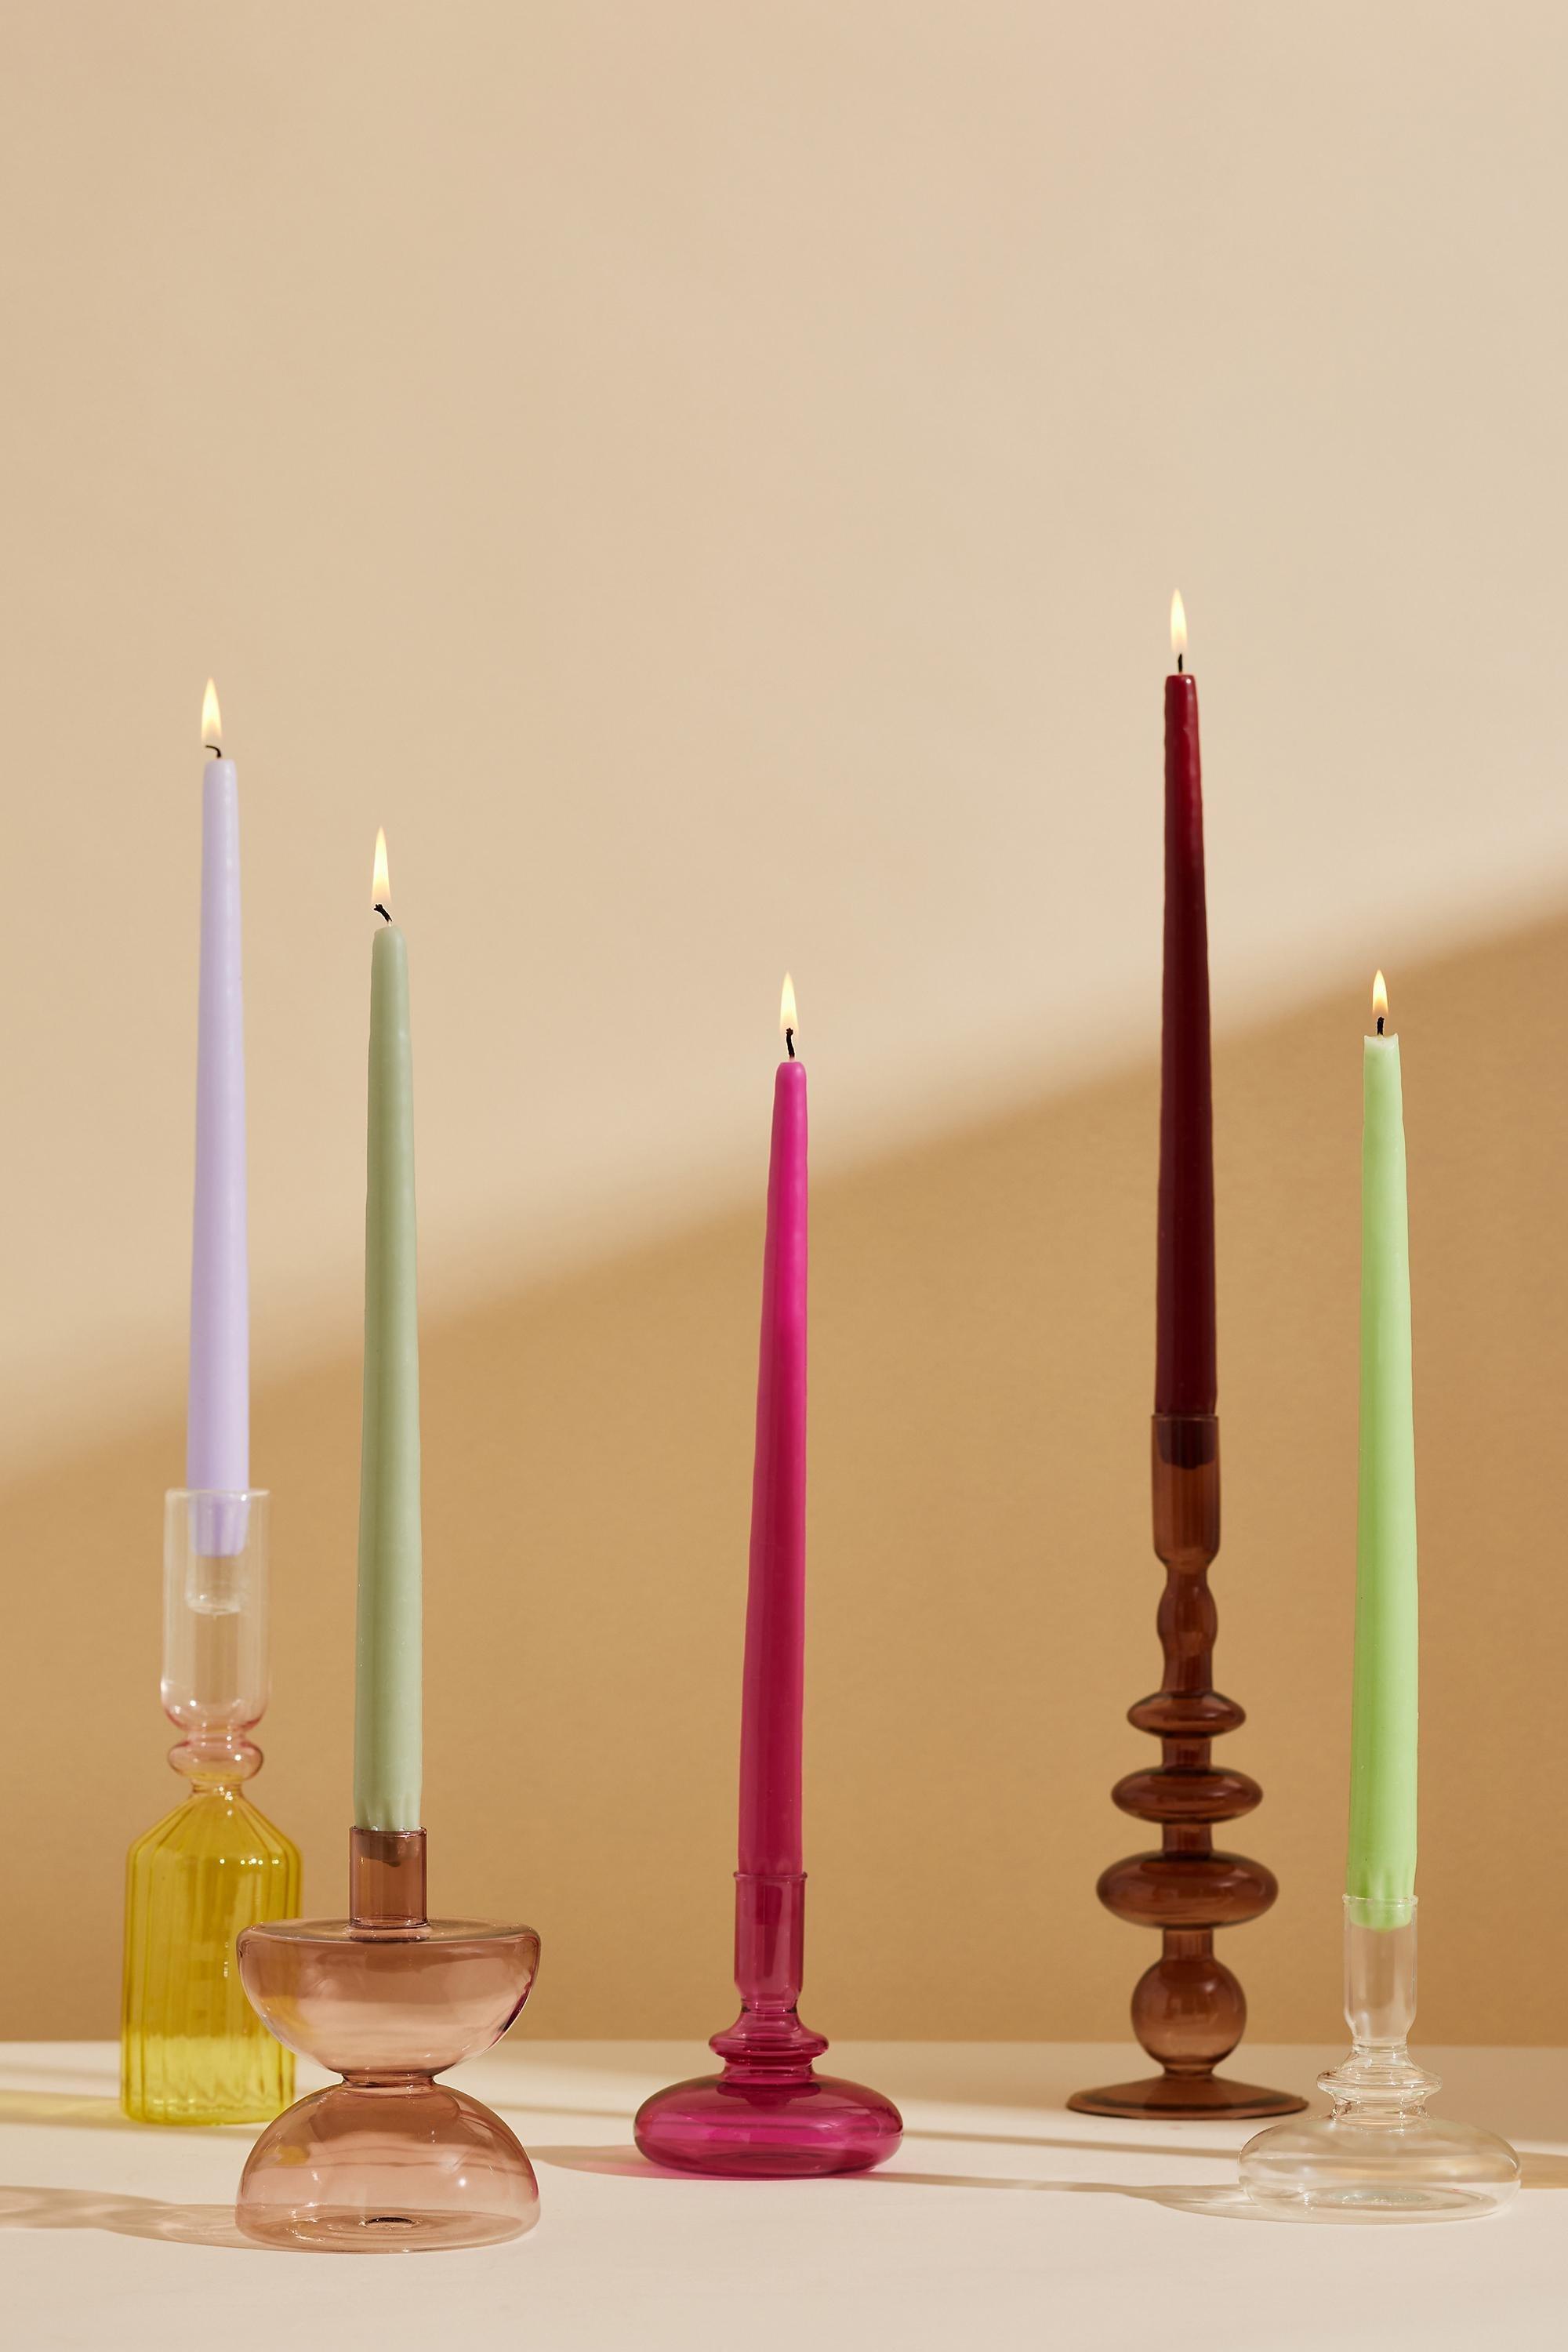 Anthropologie - Set of 2 Taper Candles, Maroon